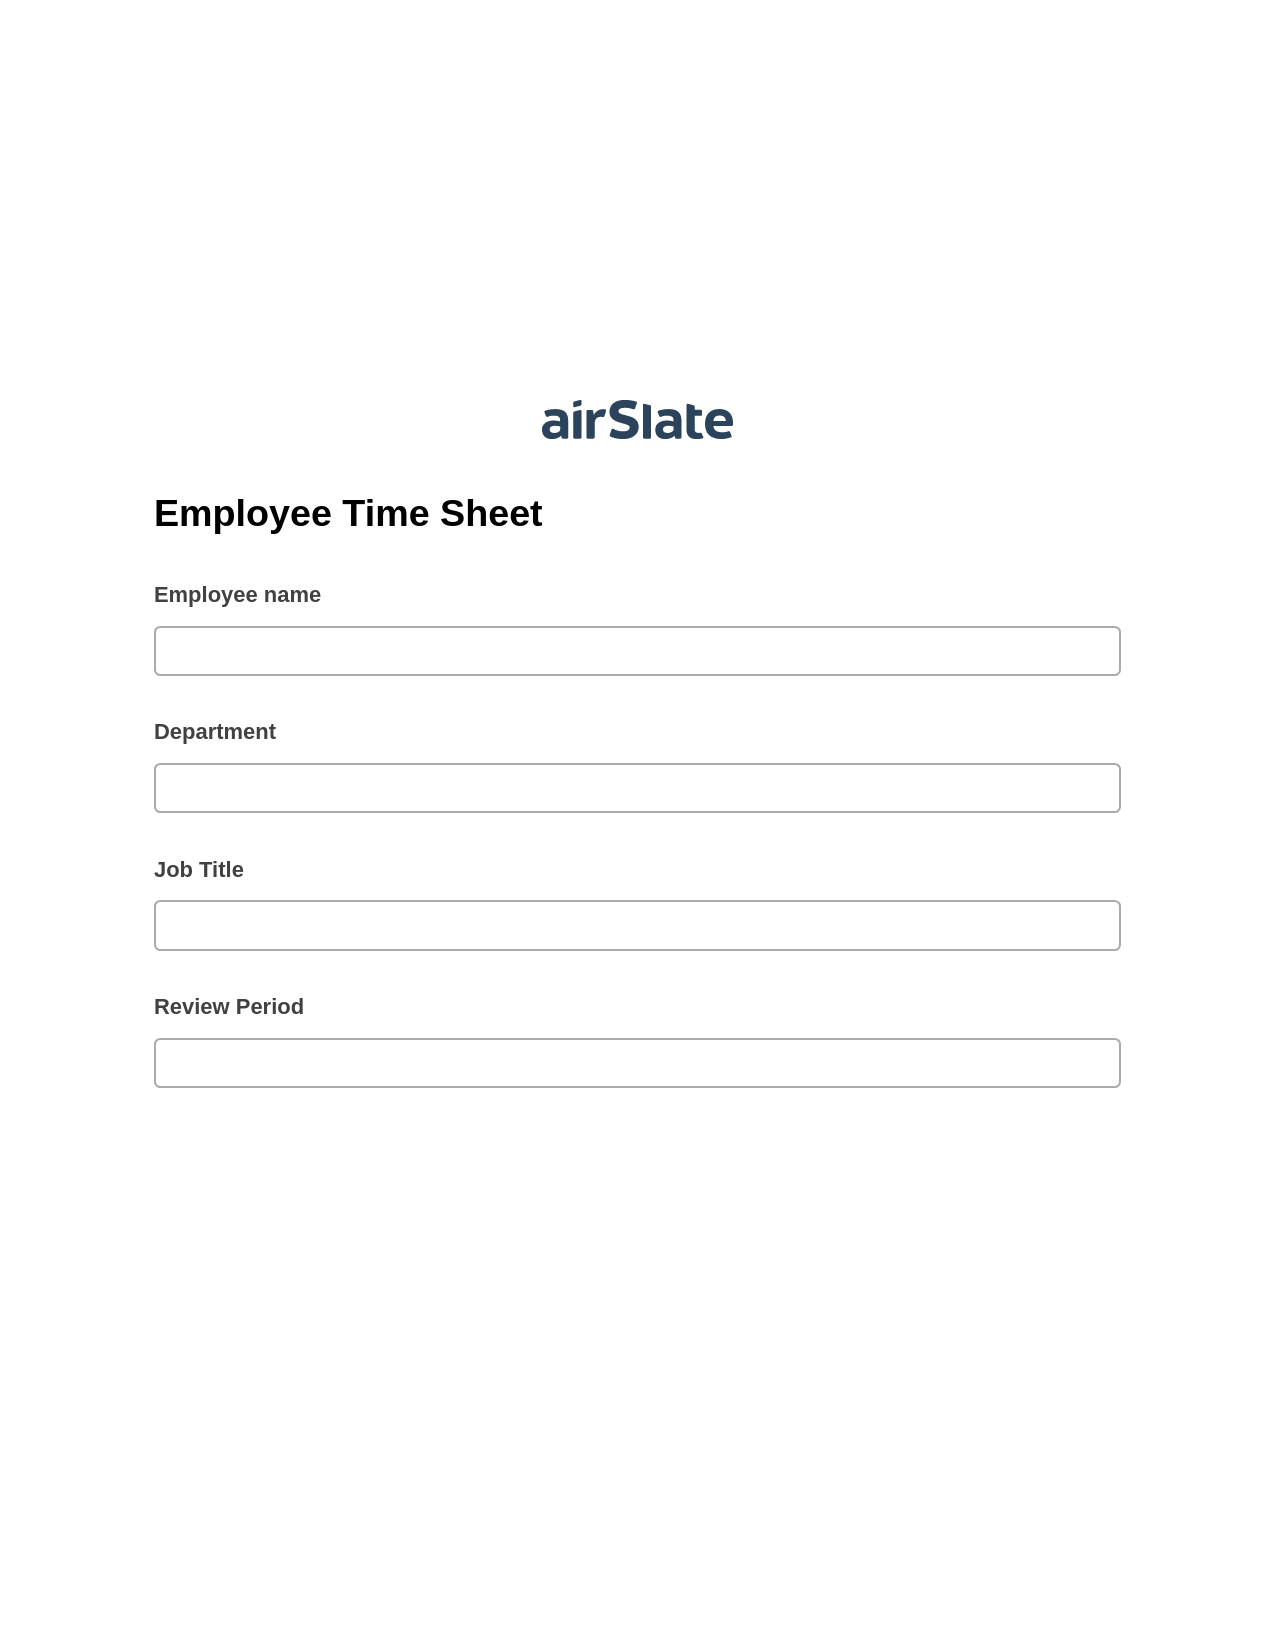 Employee Time Sheet Pre-fill Dropdowns from Excel Bot, Custom Field's Value Bot, Email Notification Postfinish Bot